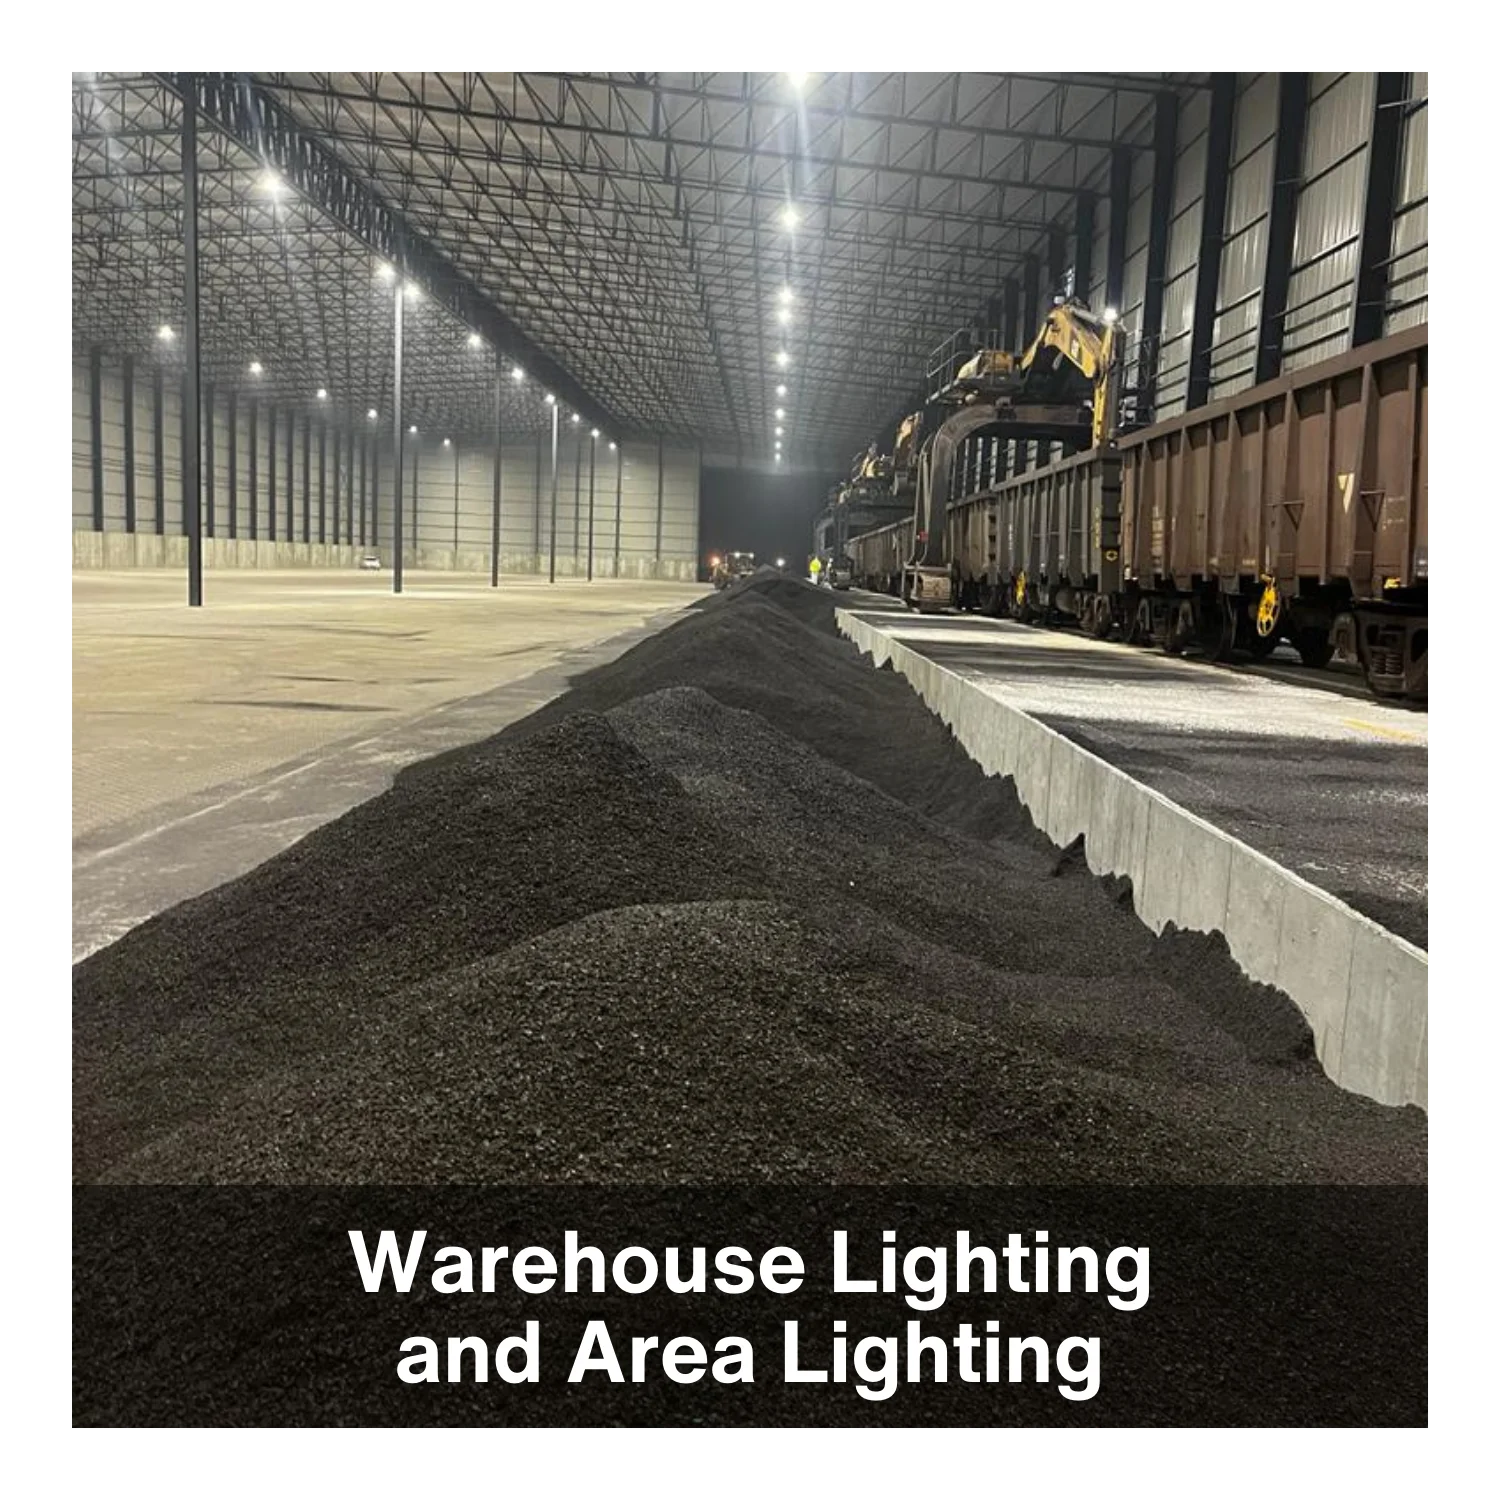 Warehouse and Area Lighting example